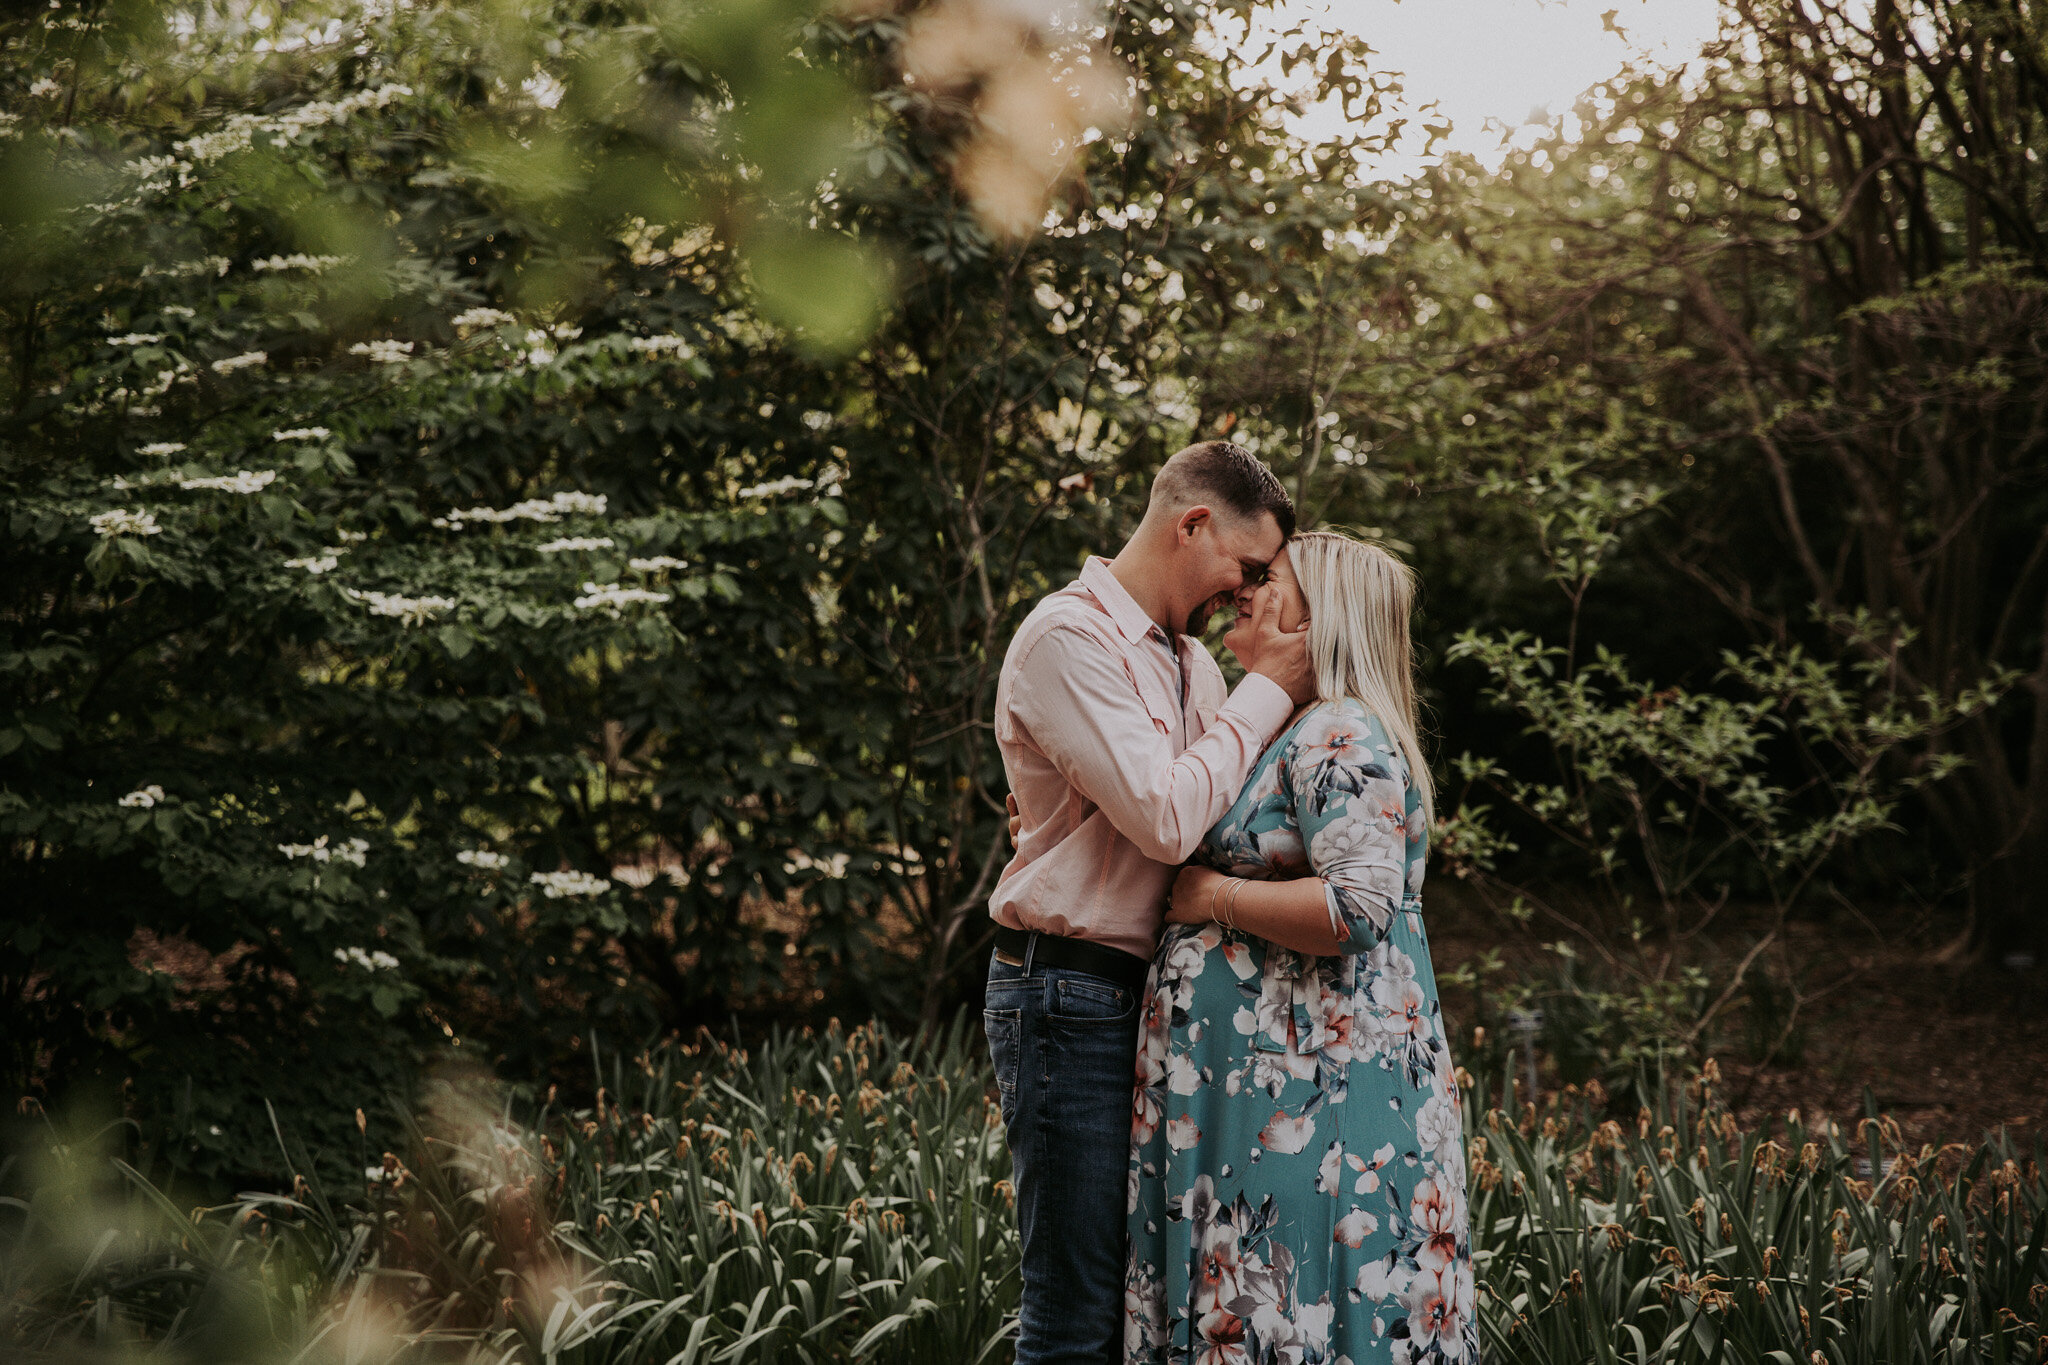 Millcreek_Park_Rose_Gardens_Davis_Canter_Youngstown_Ohio_Materntiy_Session_Floral_Fashion_Baby_Girl_Expecting_Couple_by_Newborn_Photographer_Christie_Leigh_Photo_Mahoning_County_OH_Ohio-21.jpg